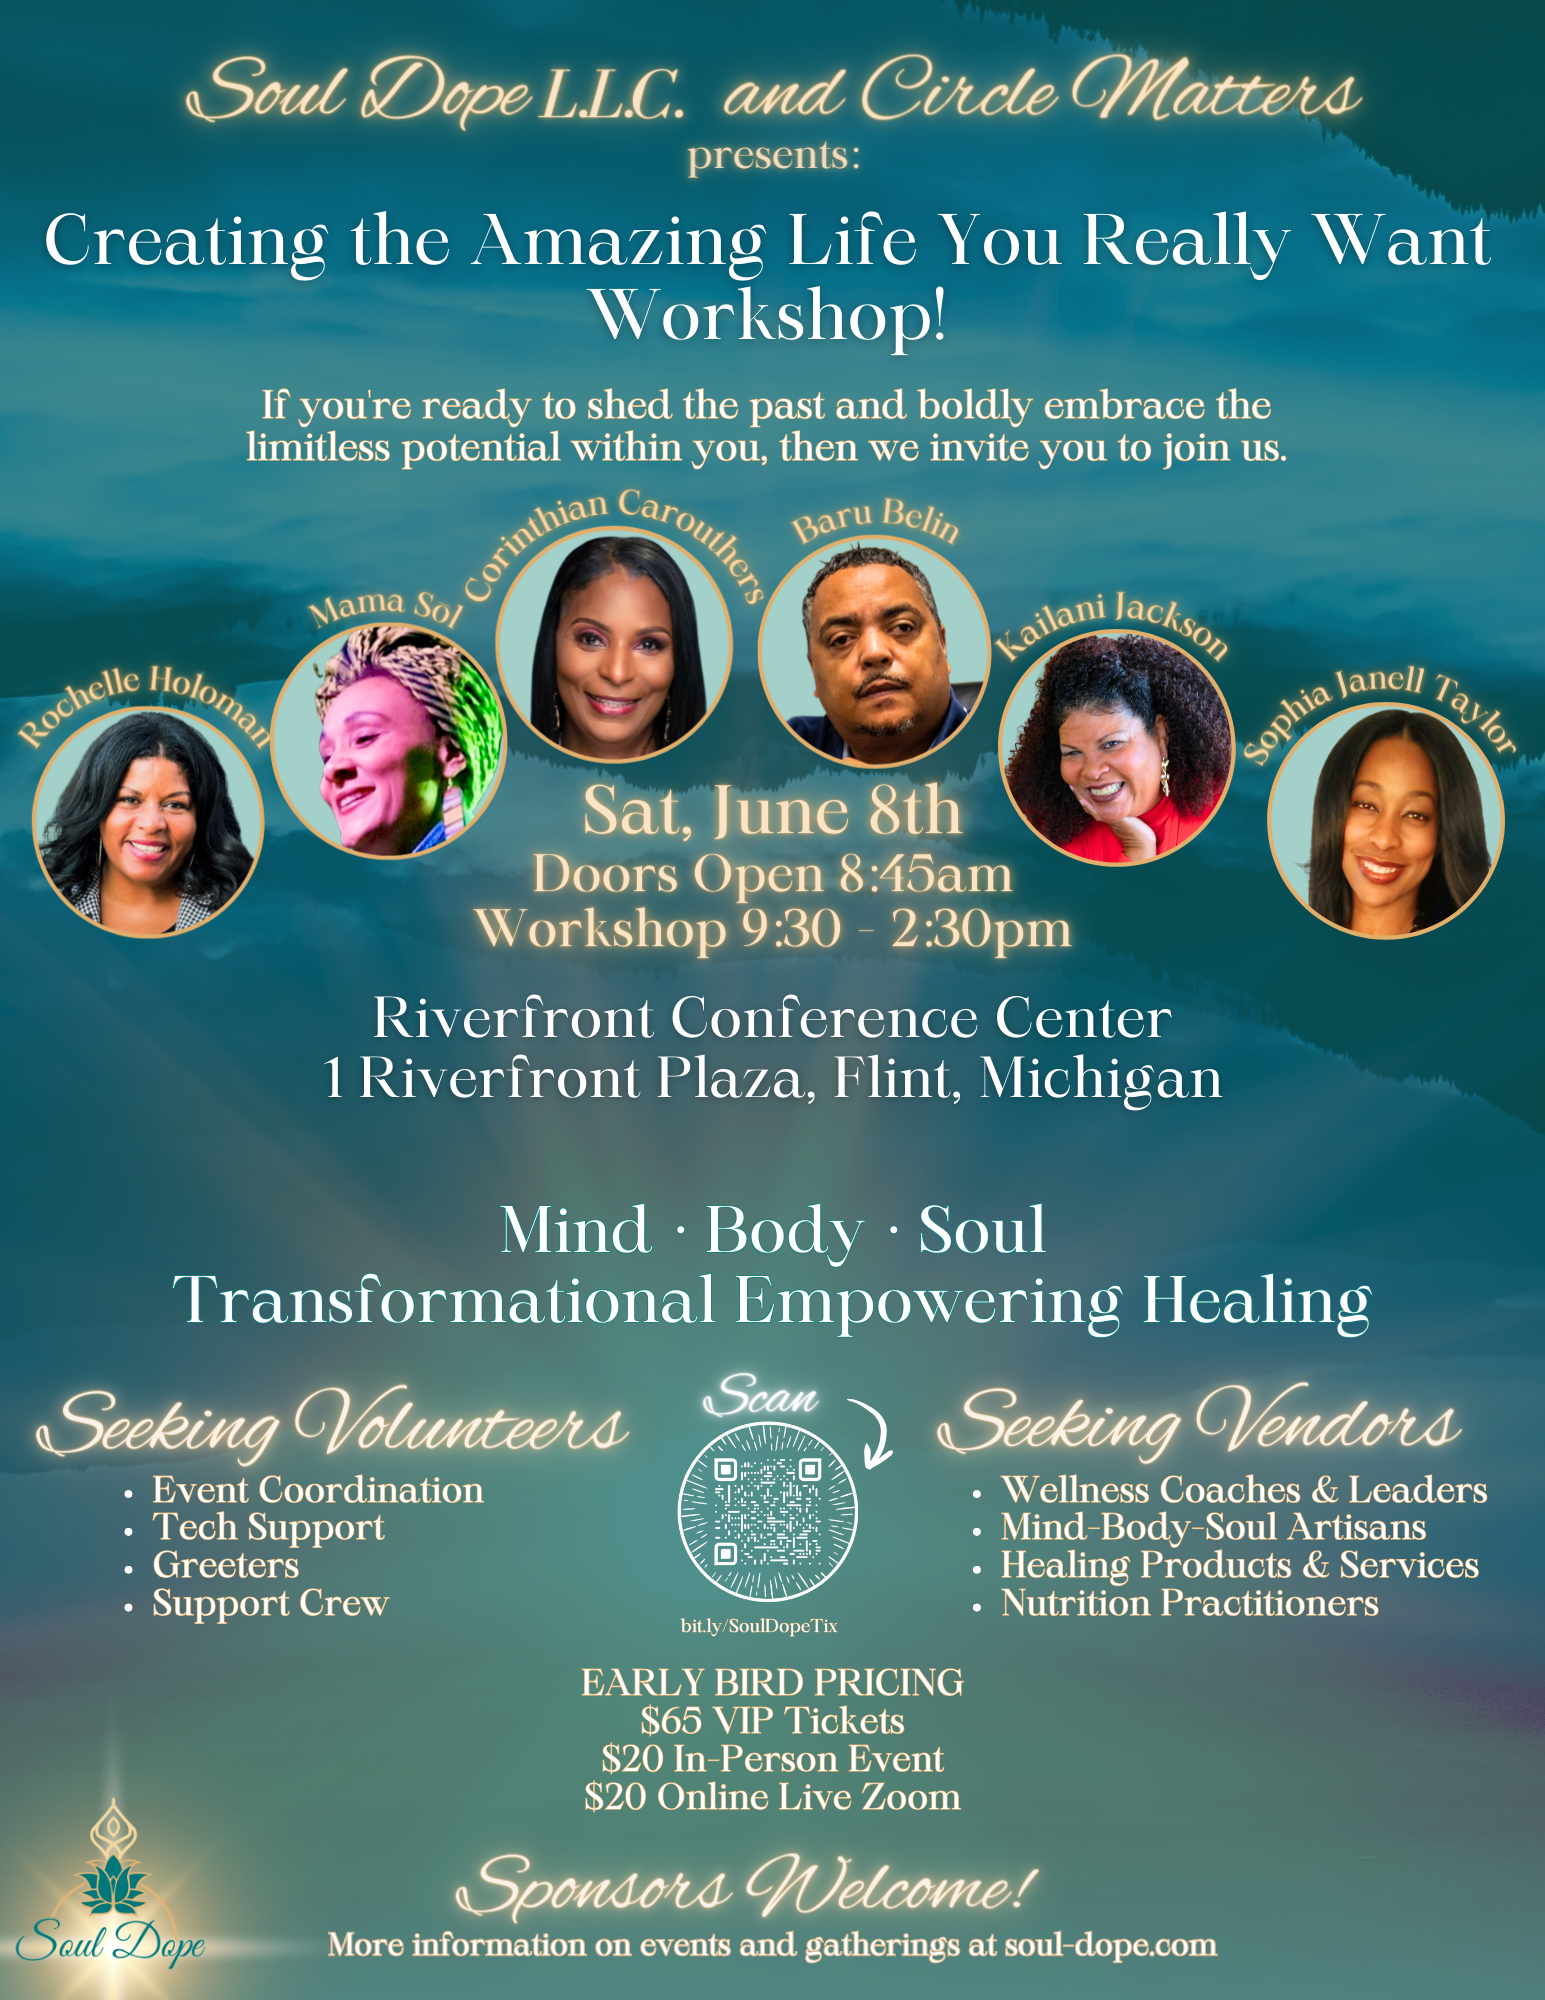 Flint Welcomes Soul Dope LLC and Circle Matters' Inspirational Self-Discovery Workshop